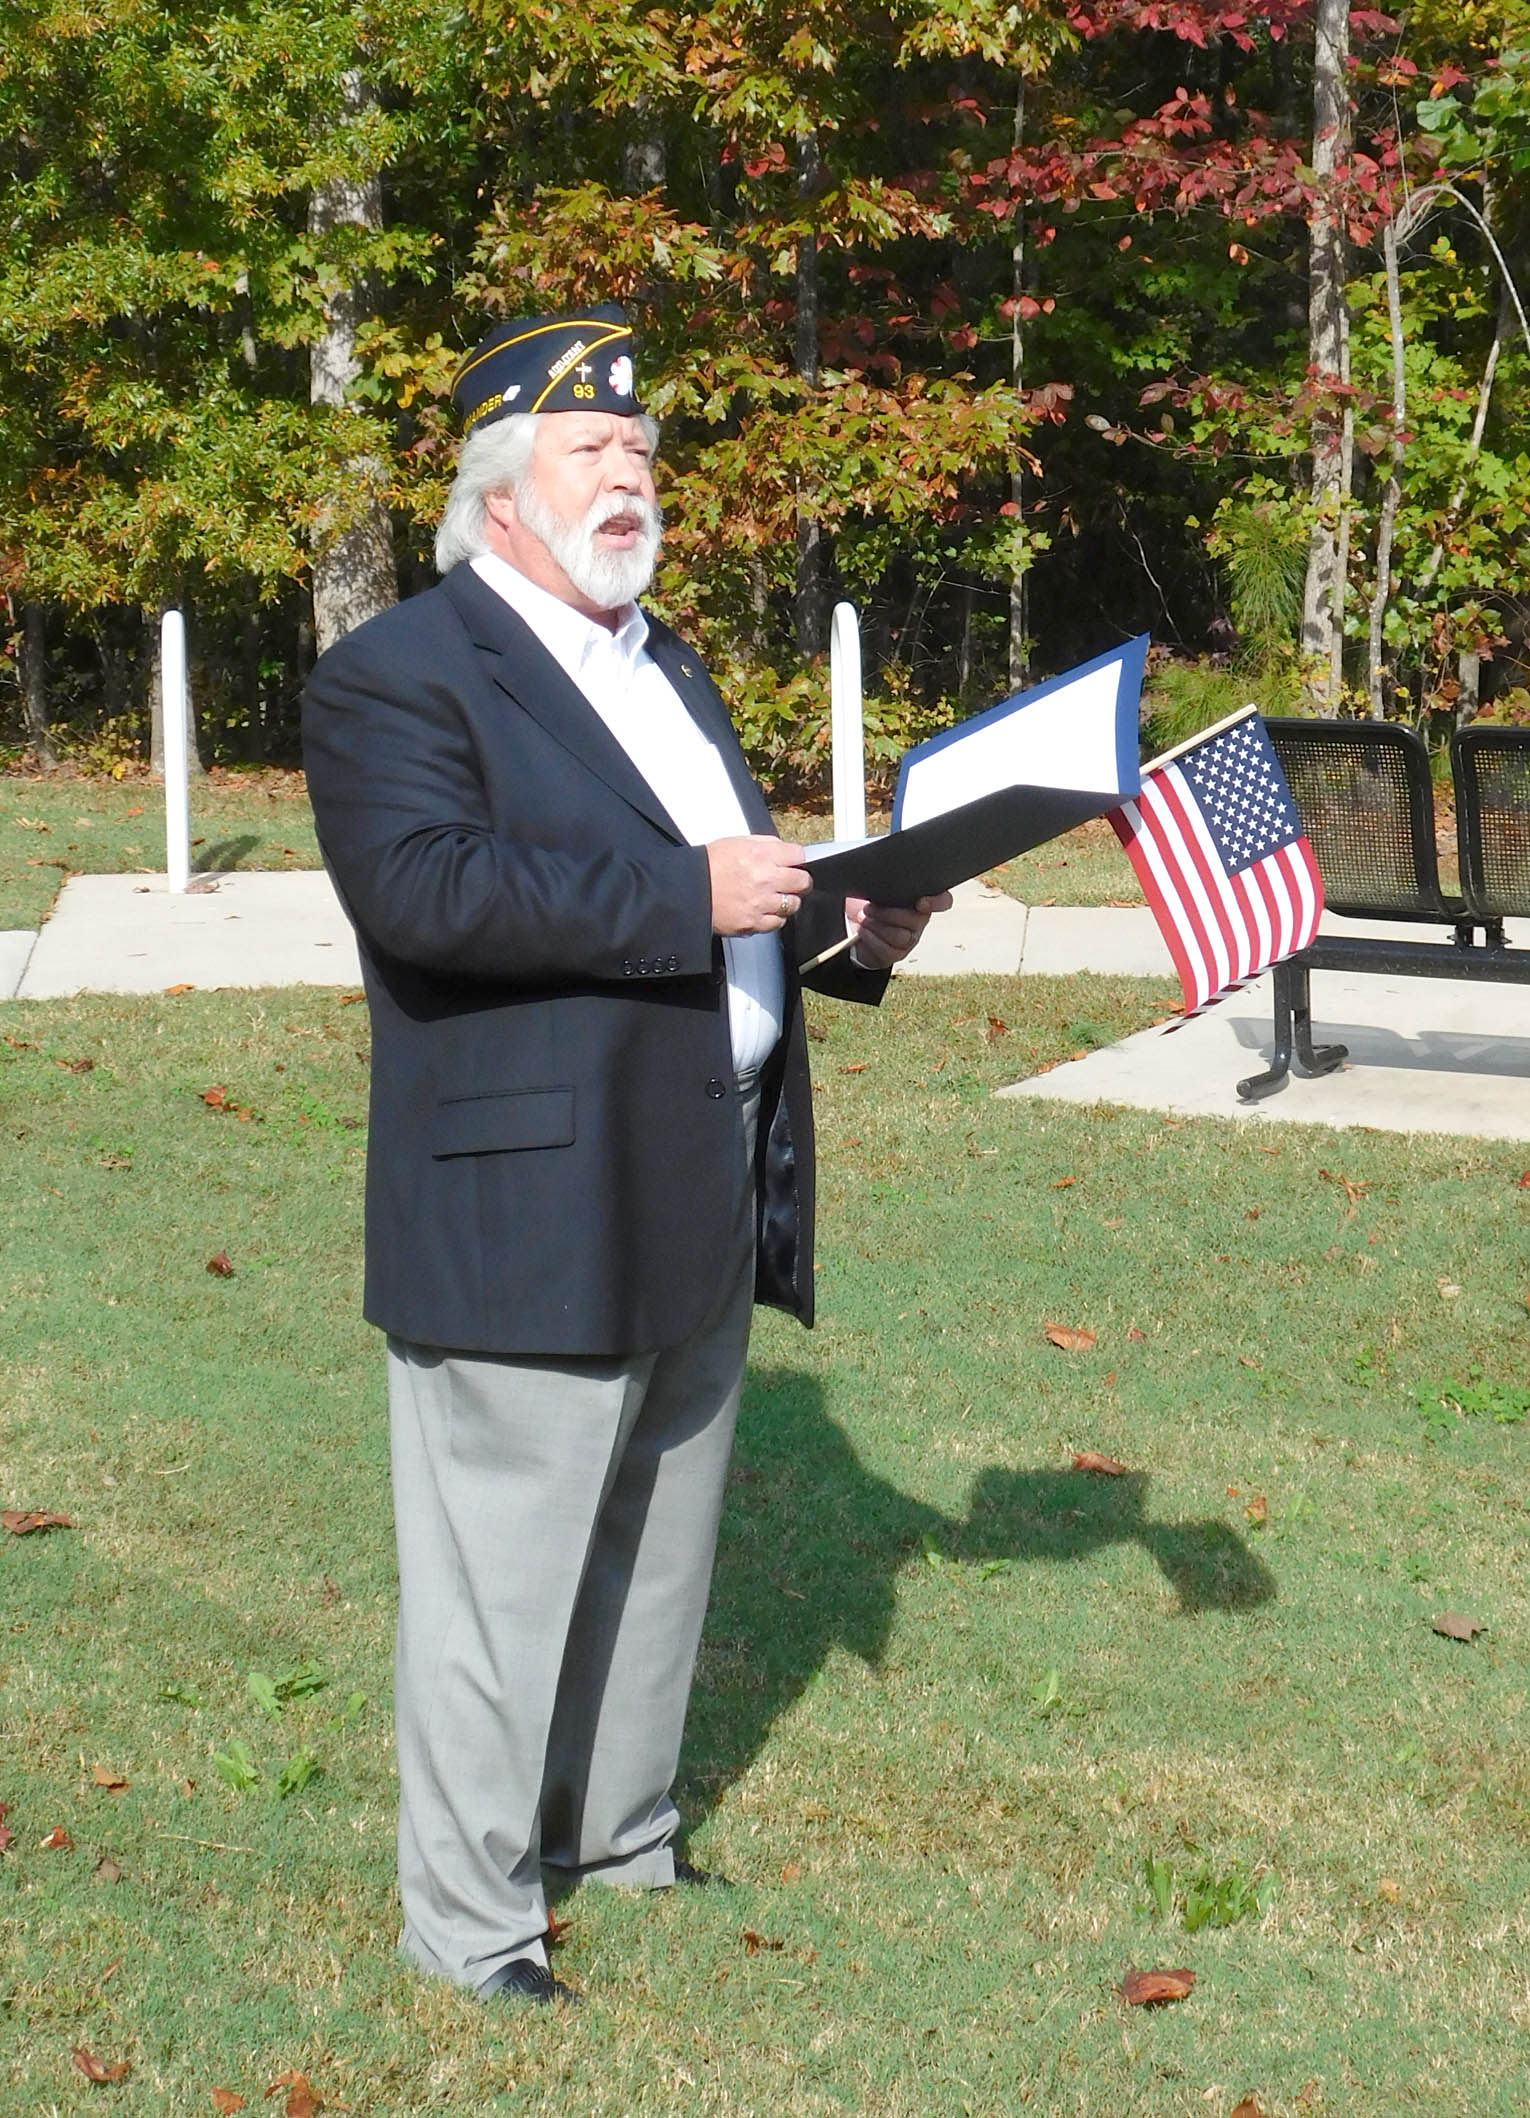 Read the full story, Veterans Day will be observed at CCCC's Siler City Center